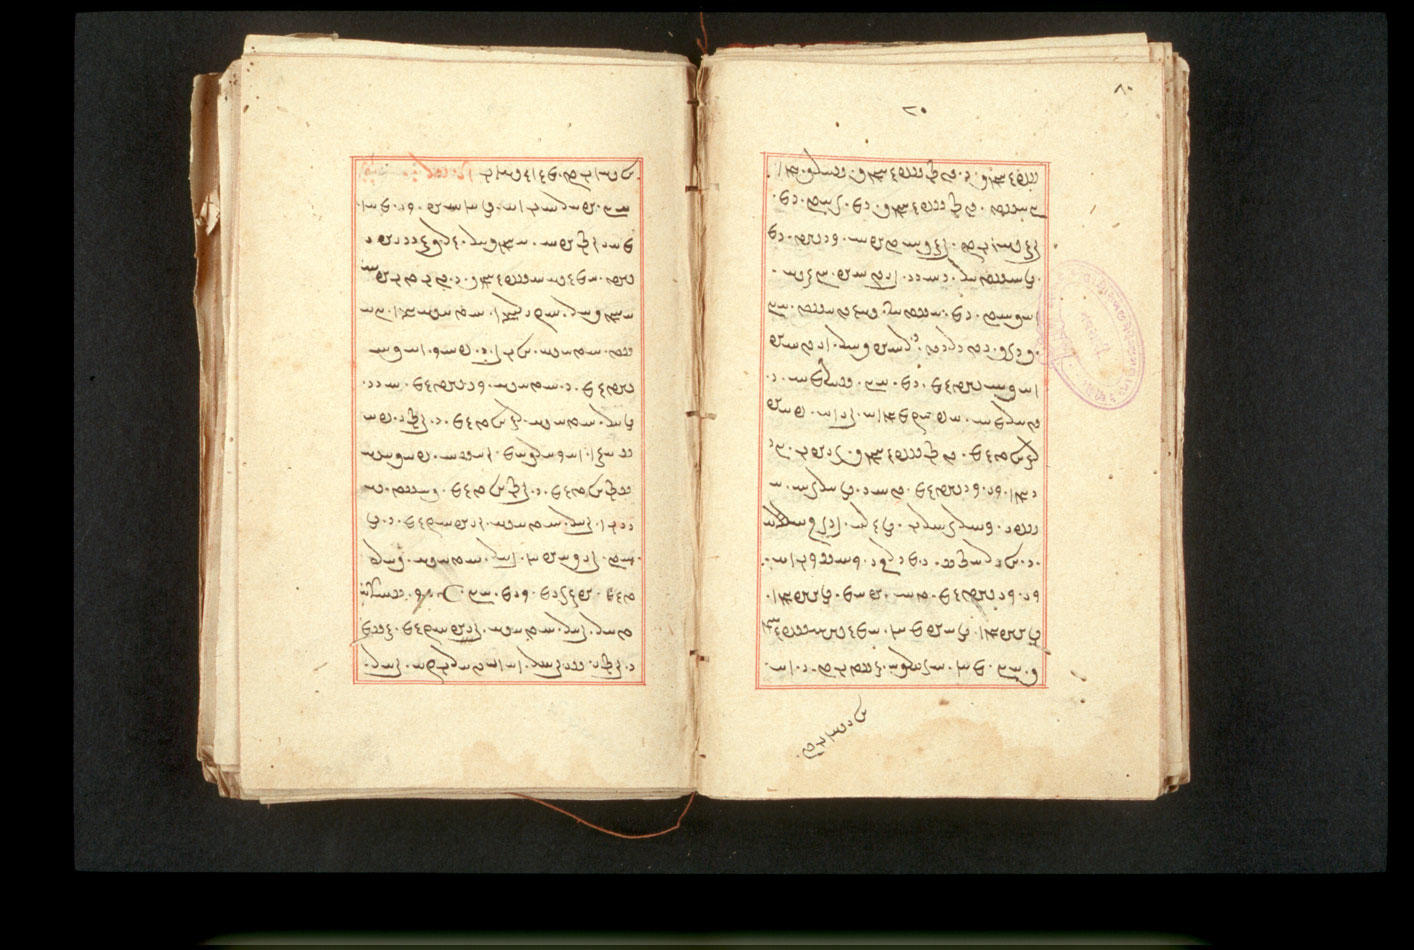 Folios 80v (right) and 81r (left)